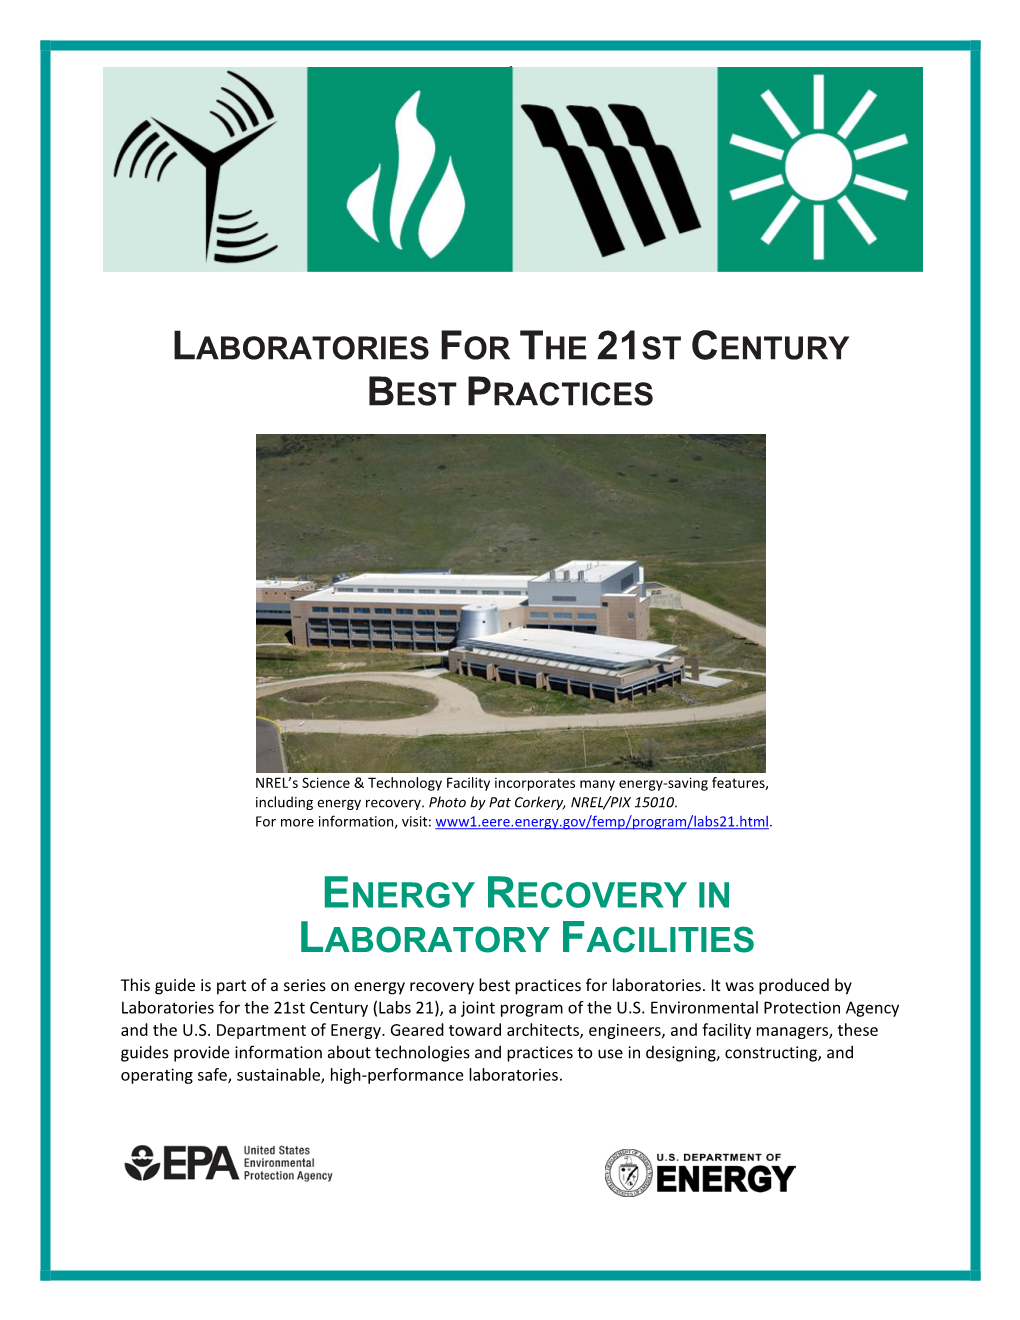 Best Practices; Energy Recovery in Laboratory Facilities